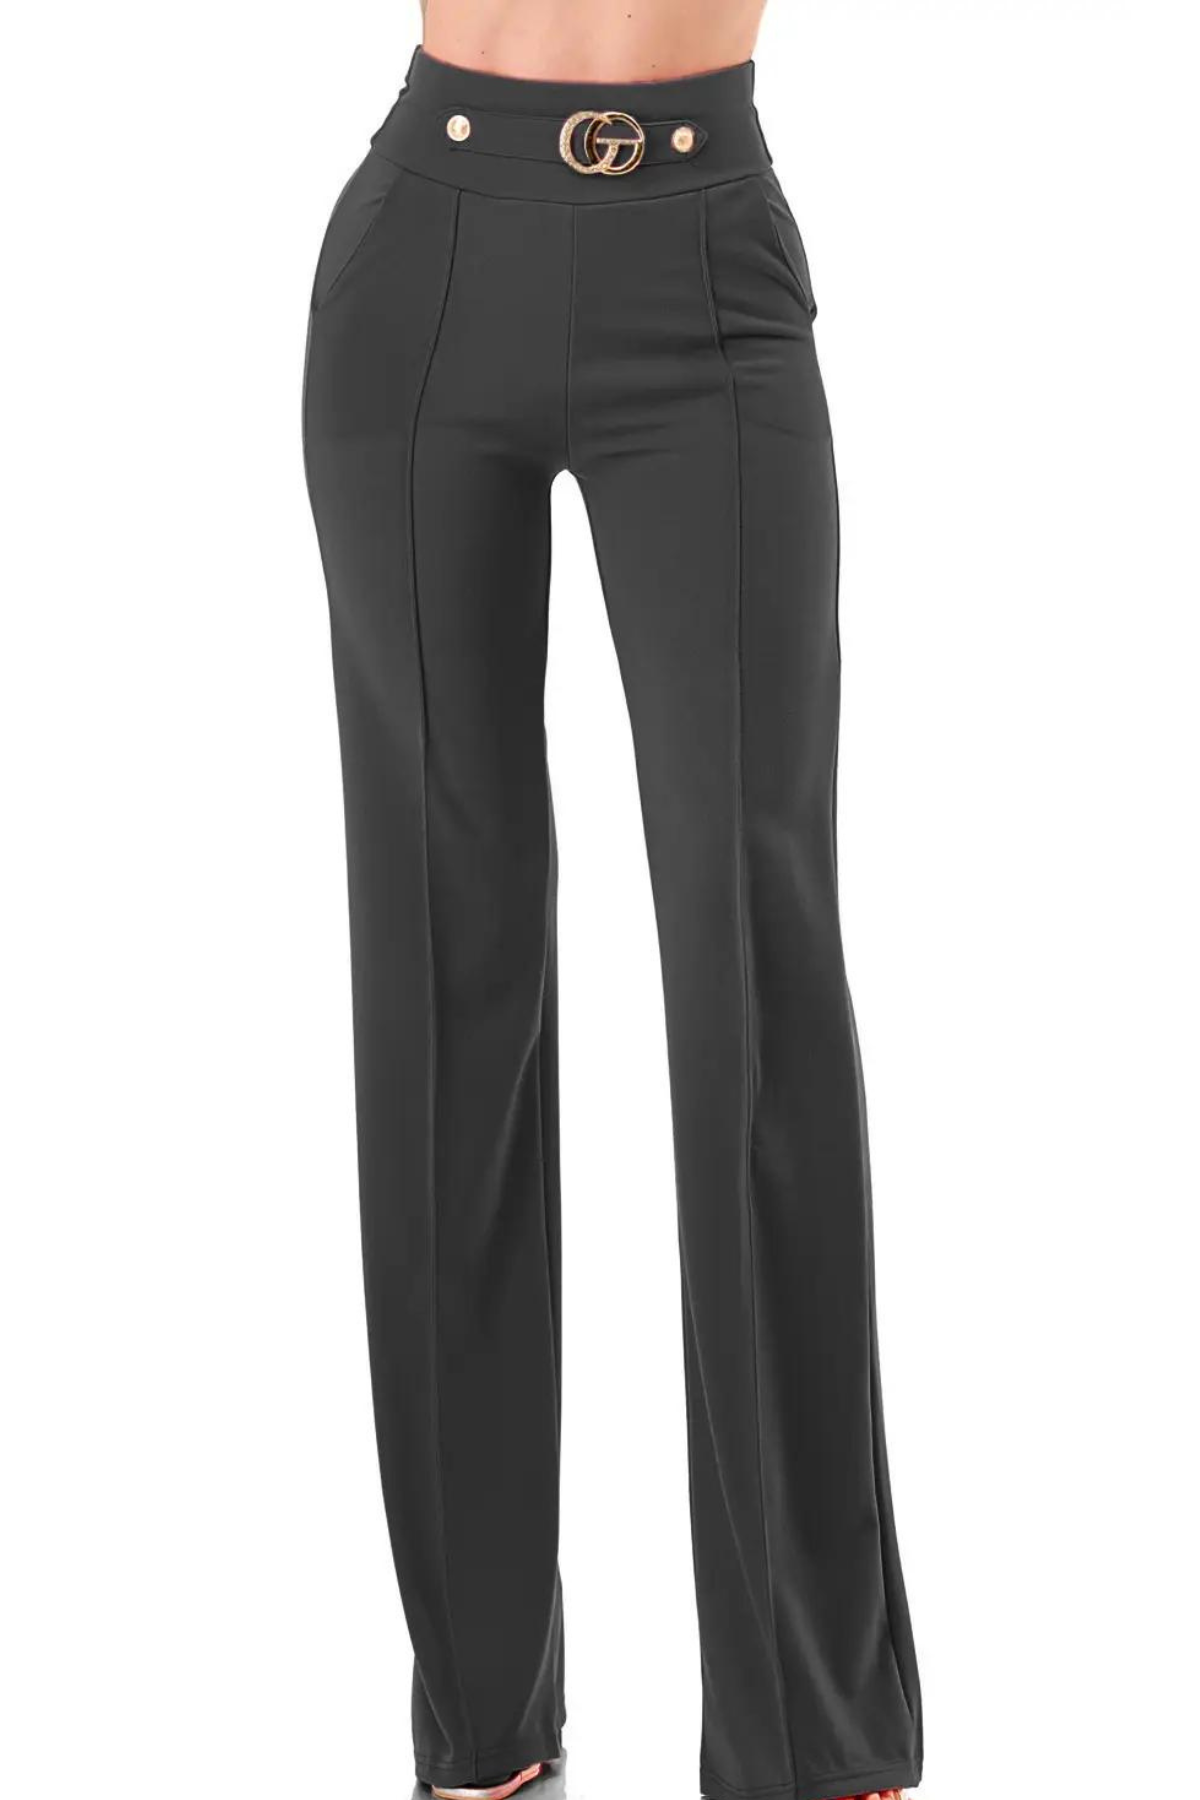 Glam High Waisted Black Pants with Buckle